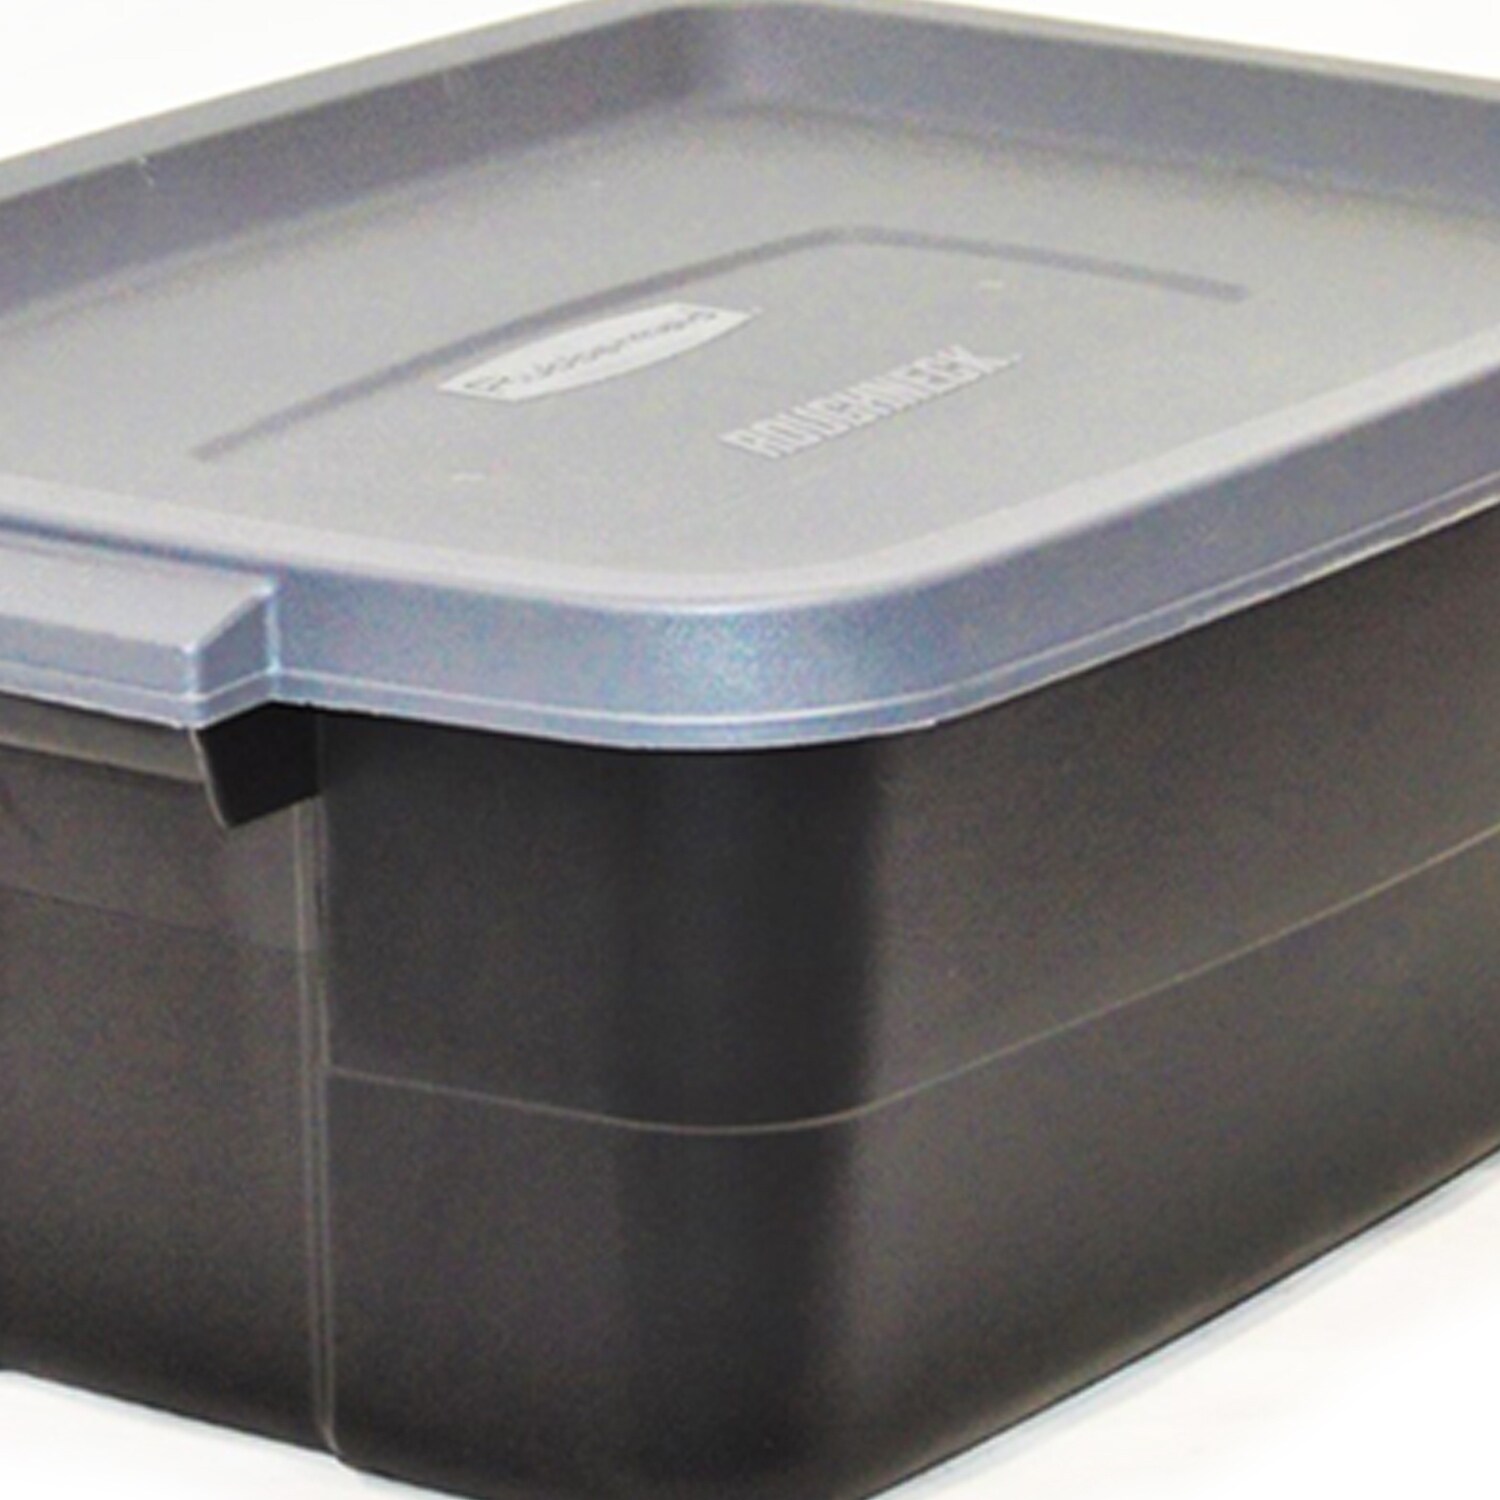 https://ak1.ostkcdn.com/images/products/is/images/direct/9defb2ccd509091dc66420287bc343f638c617ca/Rubbermaid-Roughneck-Tote-10-Gallon-Storage-Container%2C-Black-Cool-Gray-%286-Pack%29.jpg